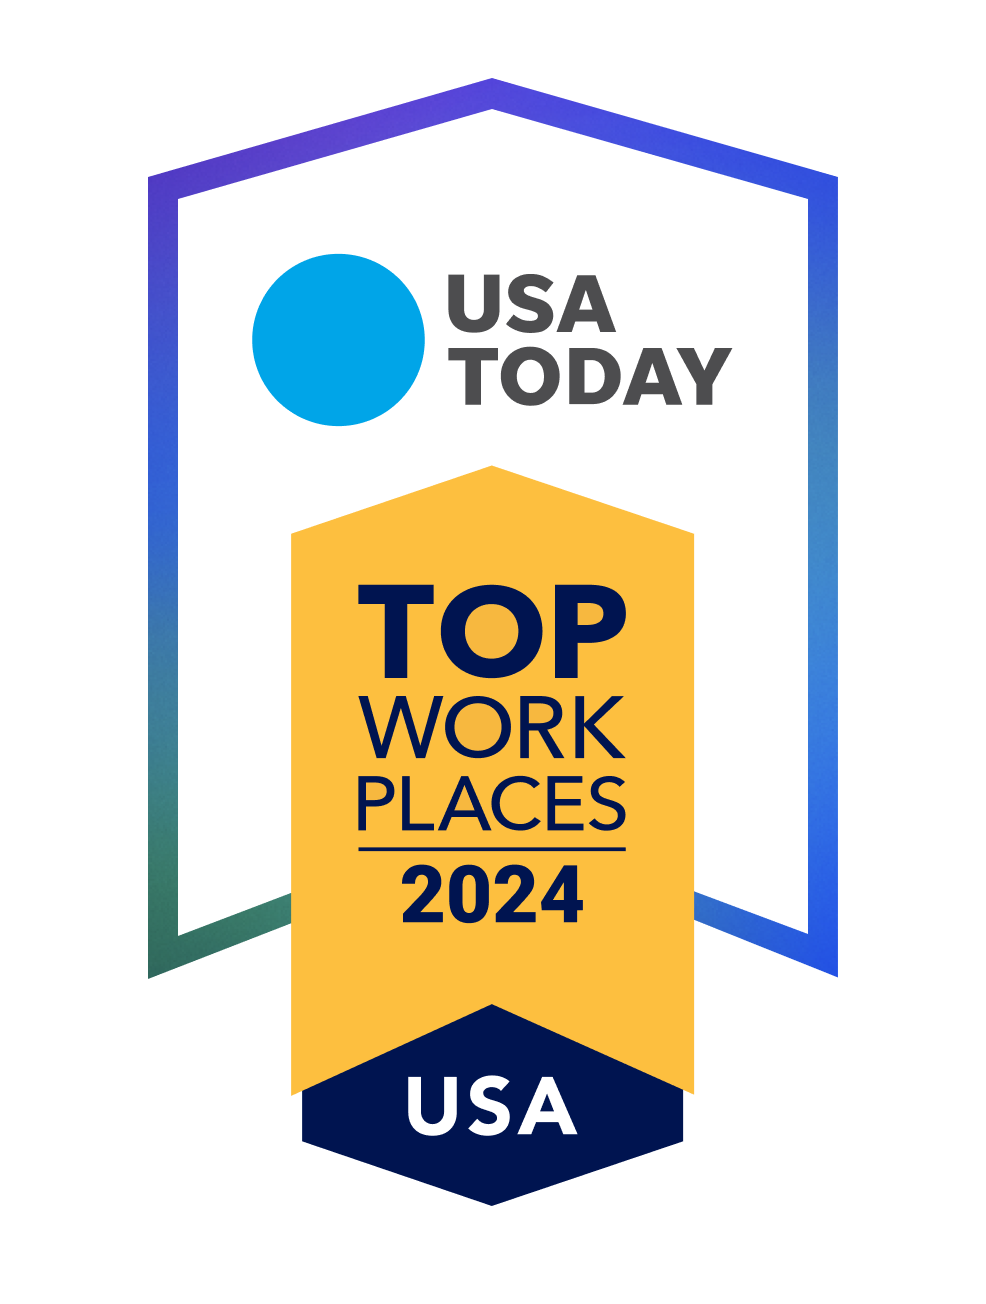 Top Work Place USA Today 2024.png